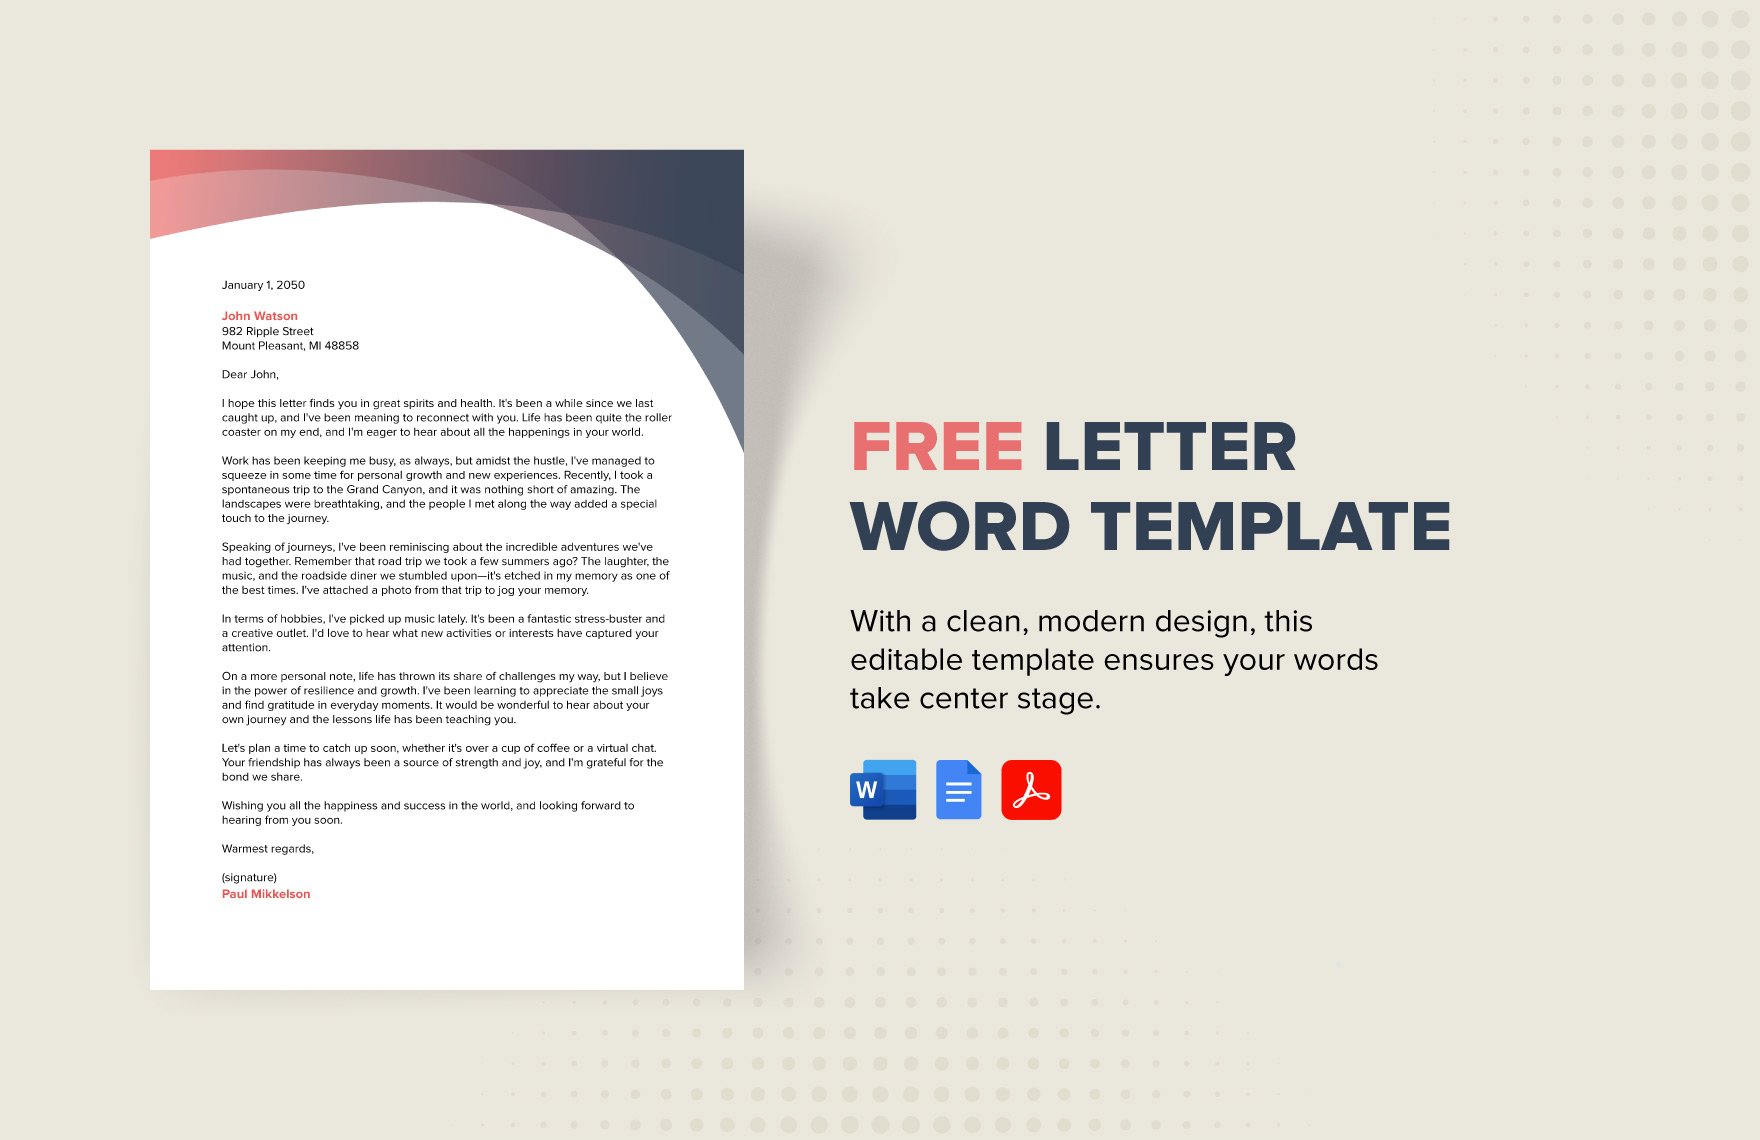 Letter Word Template